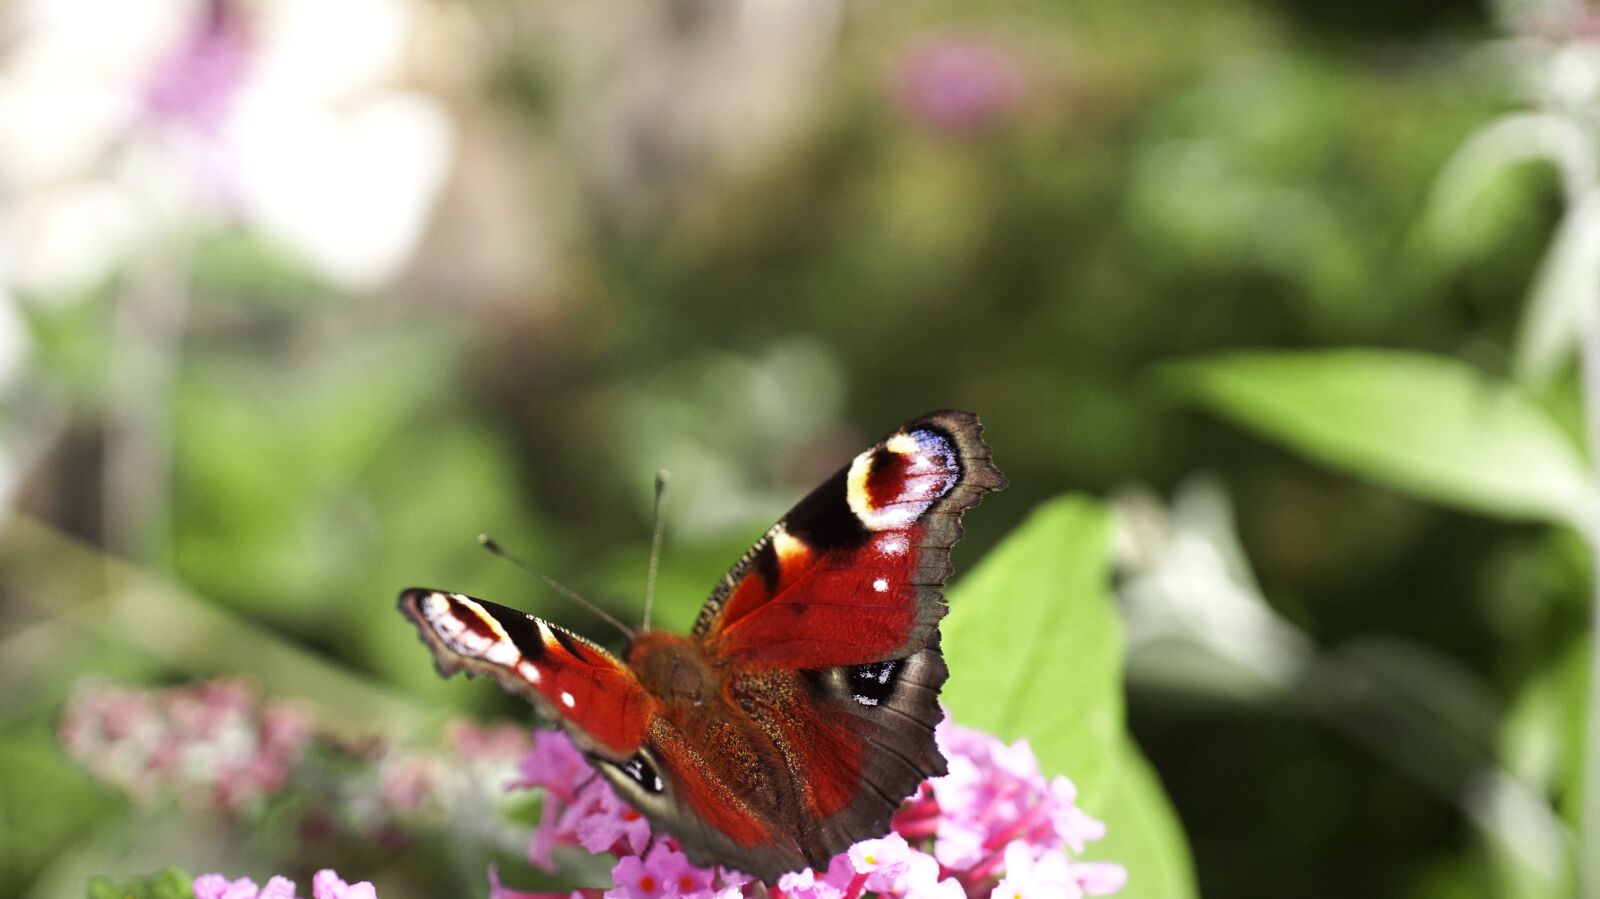 Sony E 30mm F3.5 Macro sample photo. Butterfly, nature, insect photography